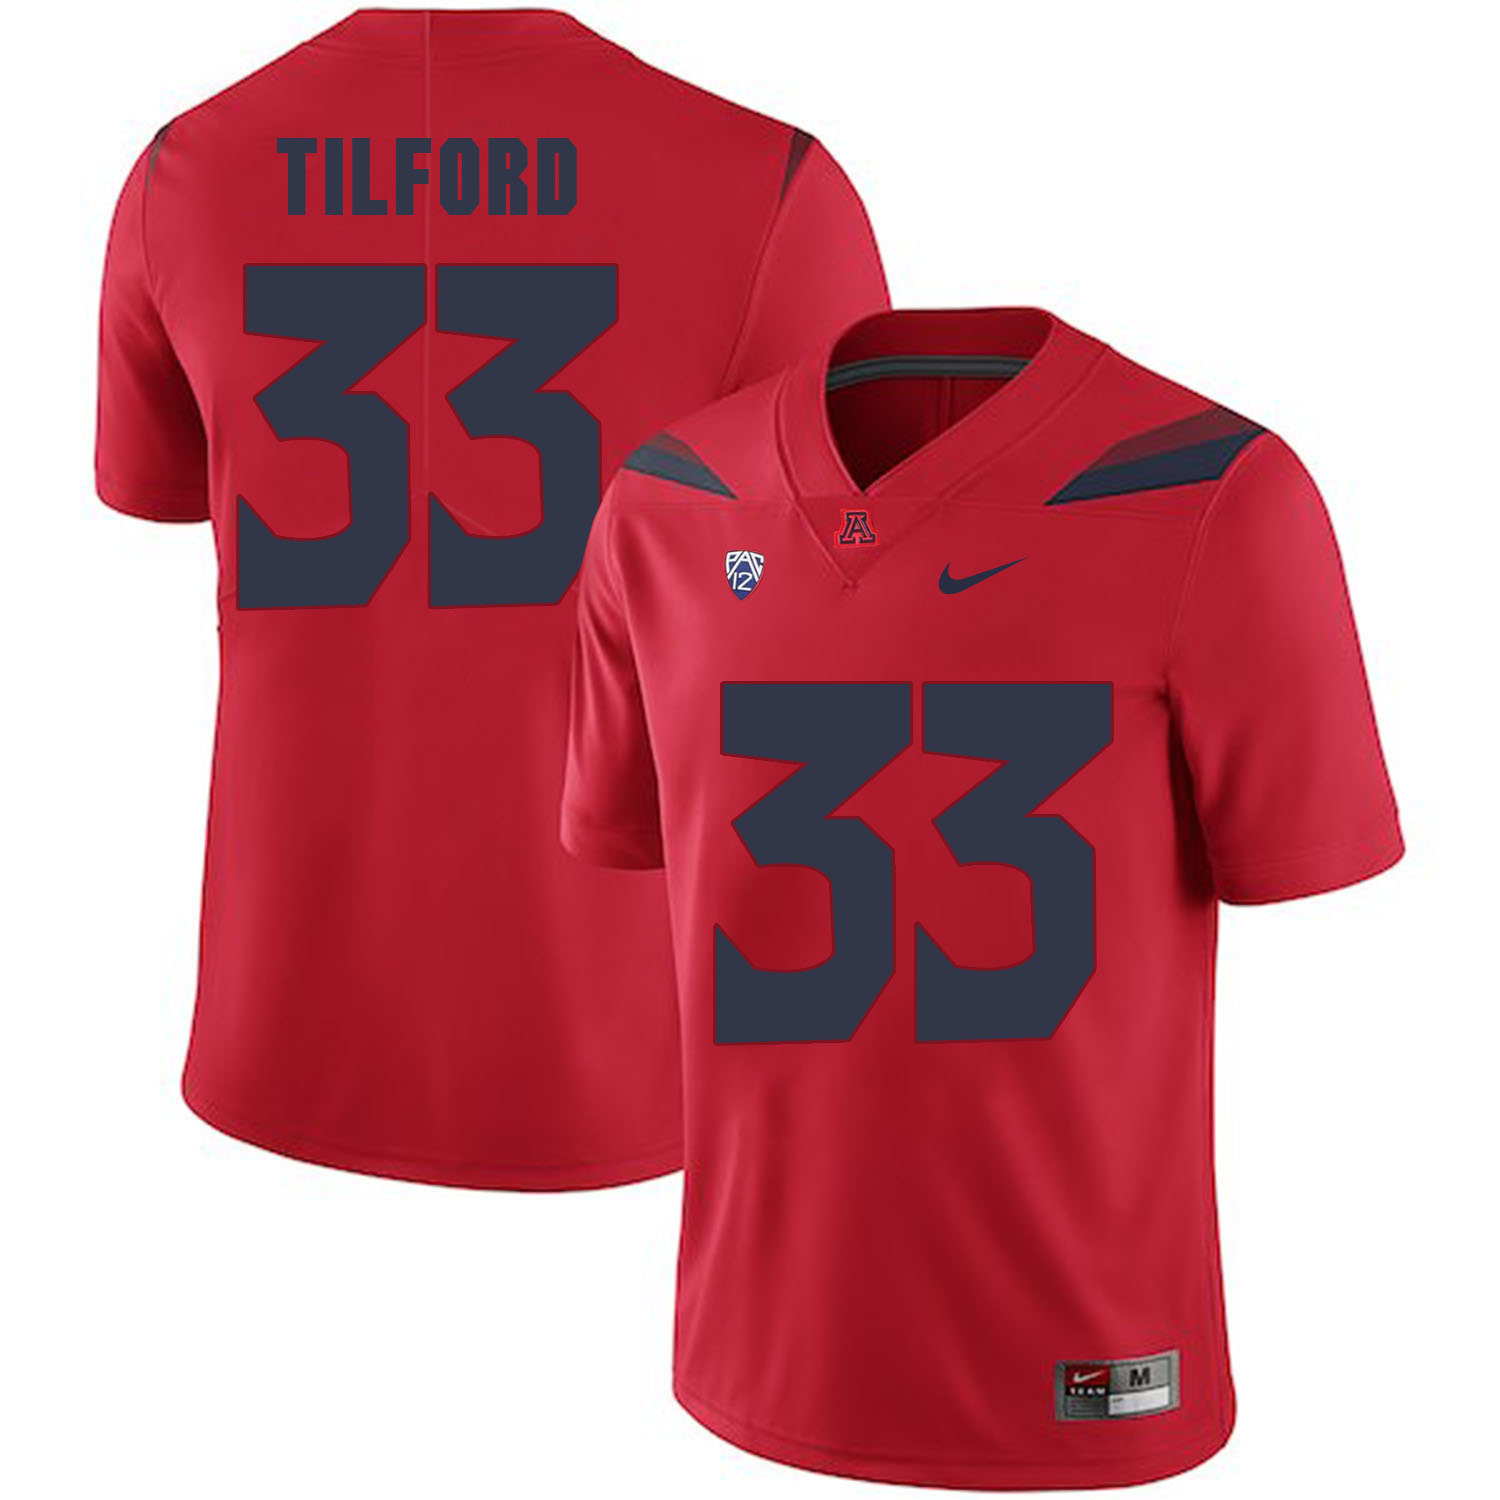 Arizona Wildcats 33 Nathan Tilford Red College Football Jersey